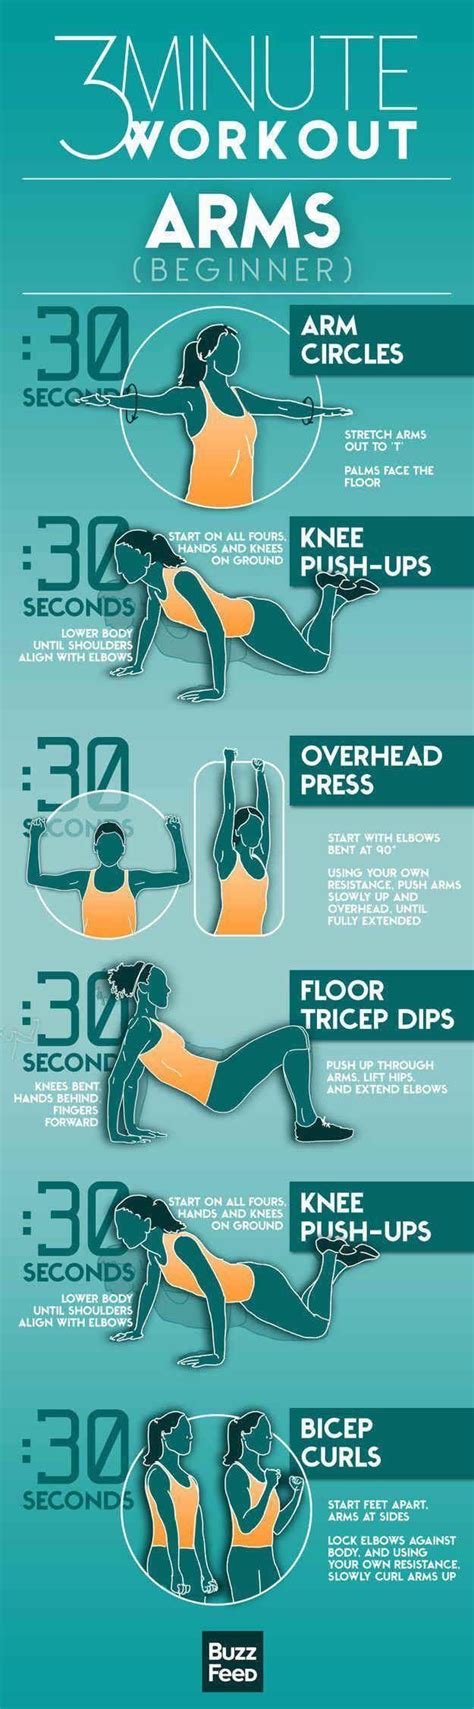 3 Minute Workout For Arms Begginer Health Fitness Arm Workout At